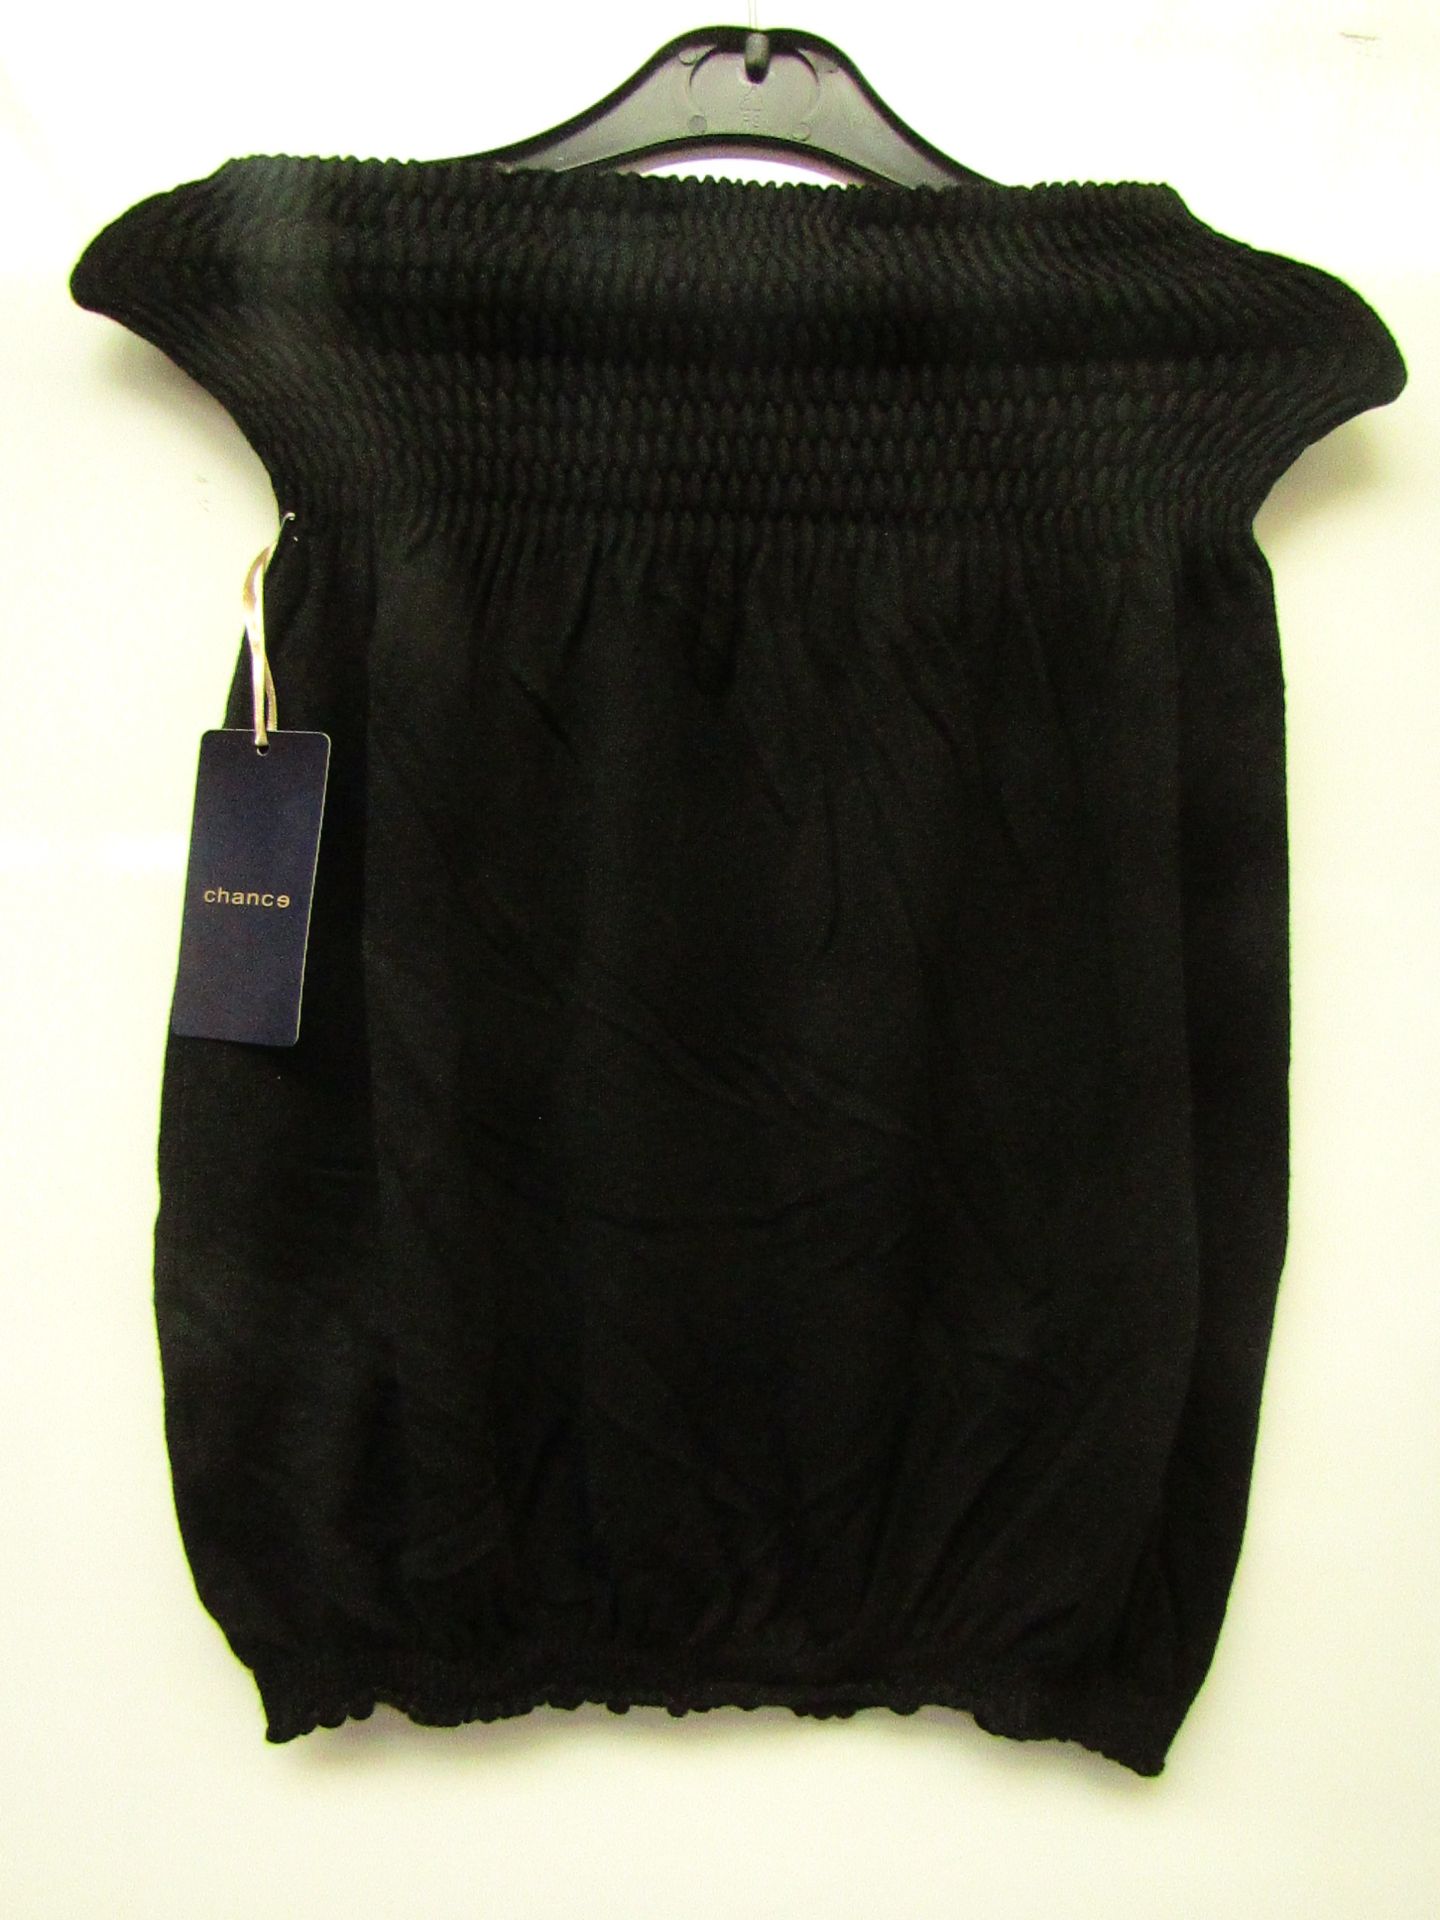 Chances Ladies Brown Knitted Strapless Top size M/L new with tag (image shows black for example